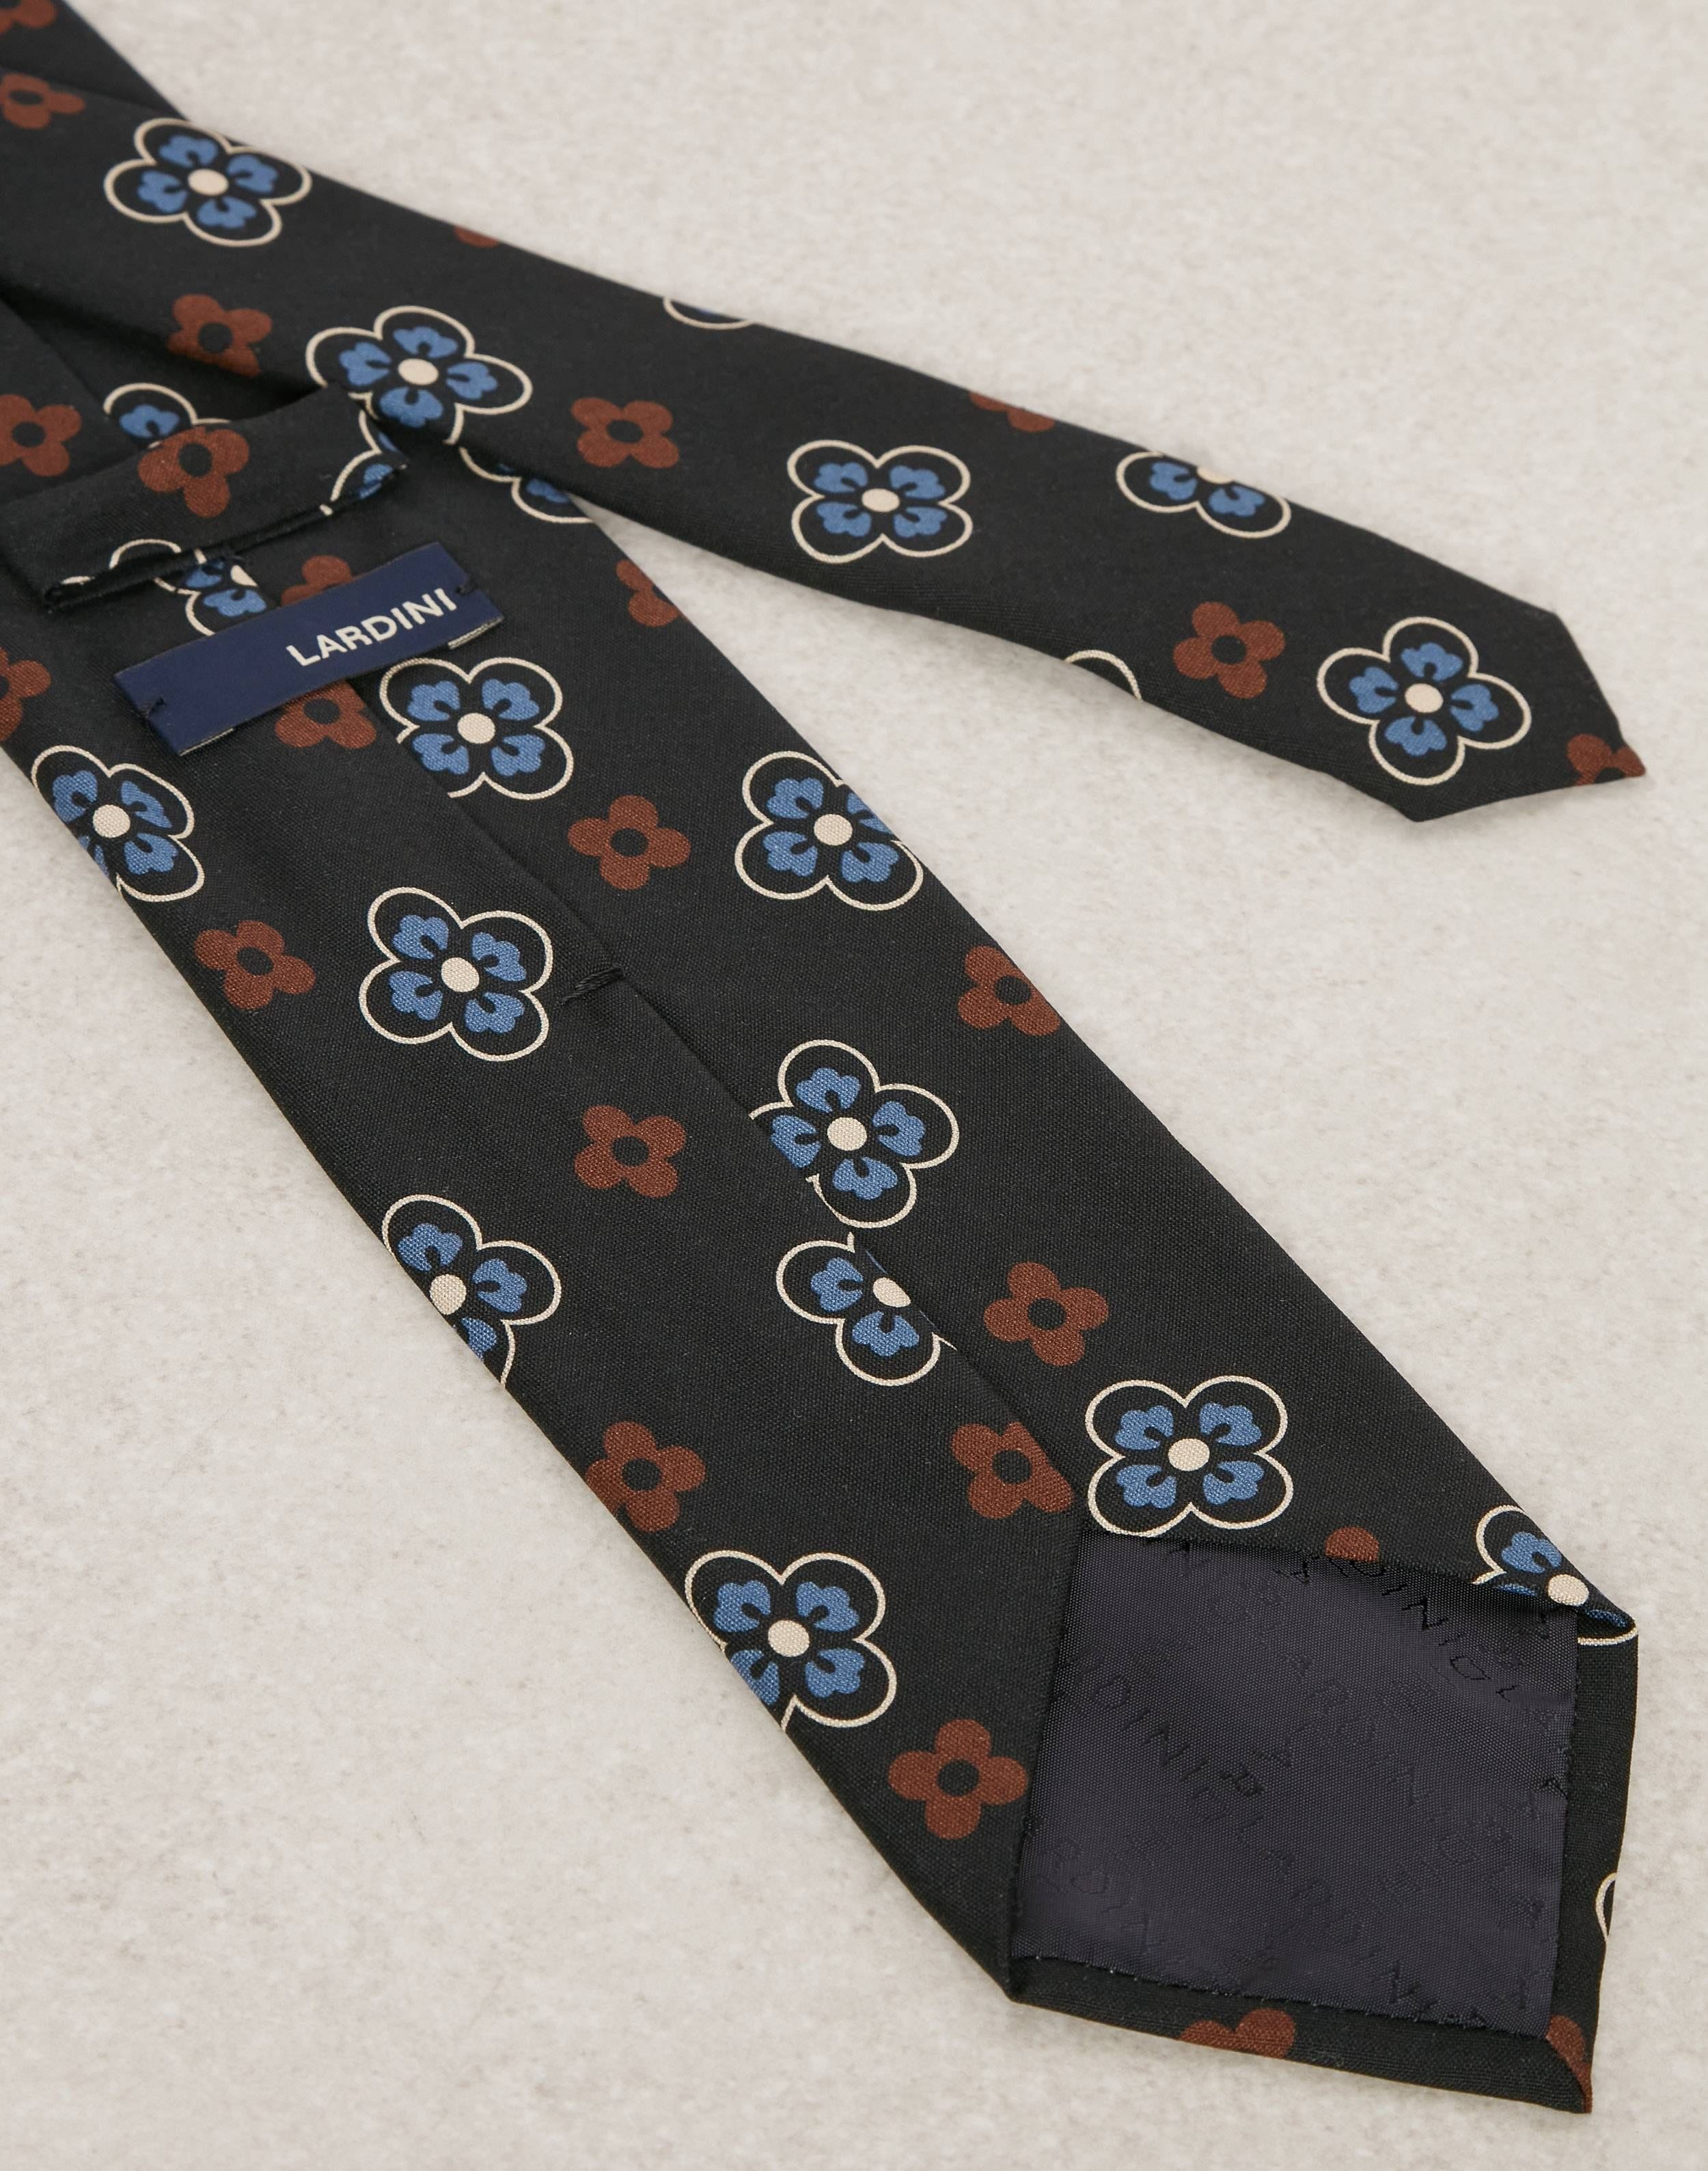 Wool-and-silk tie with floral pattern